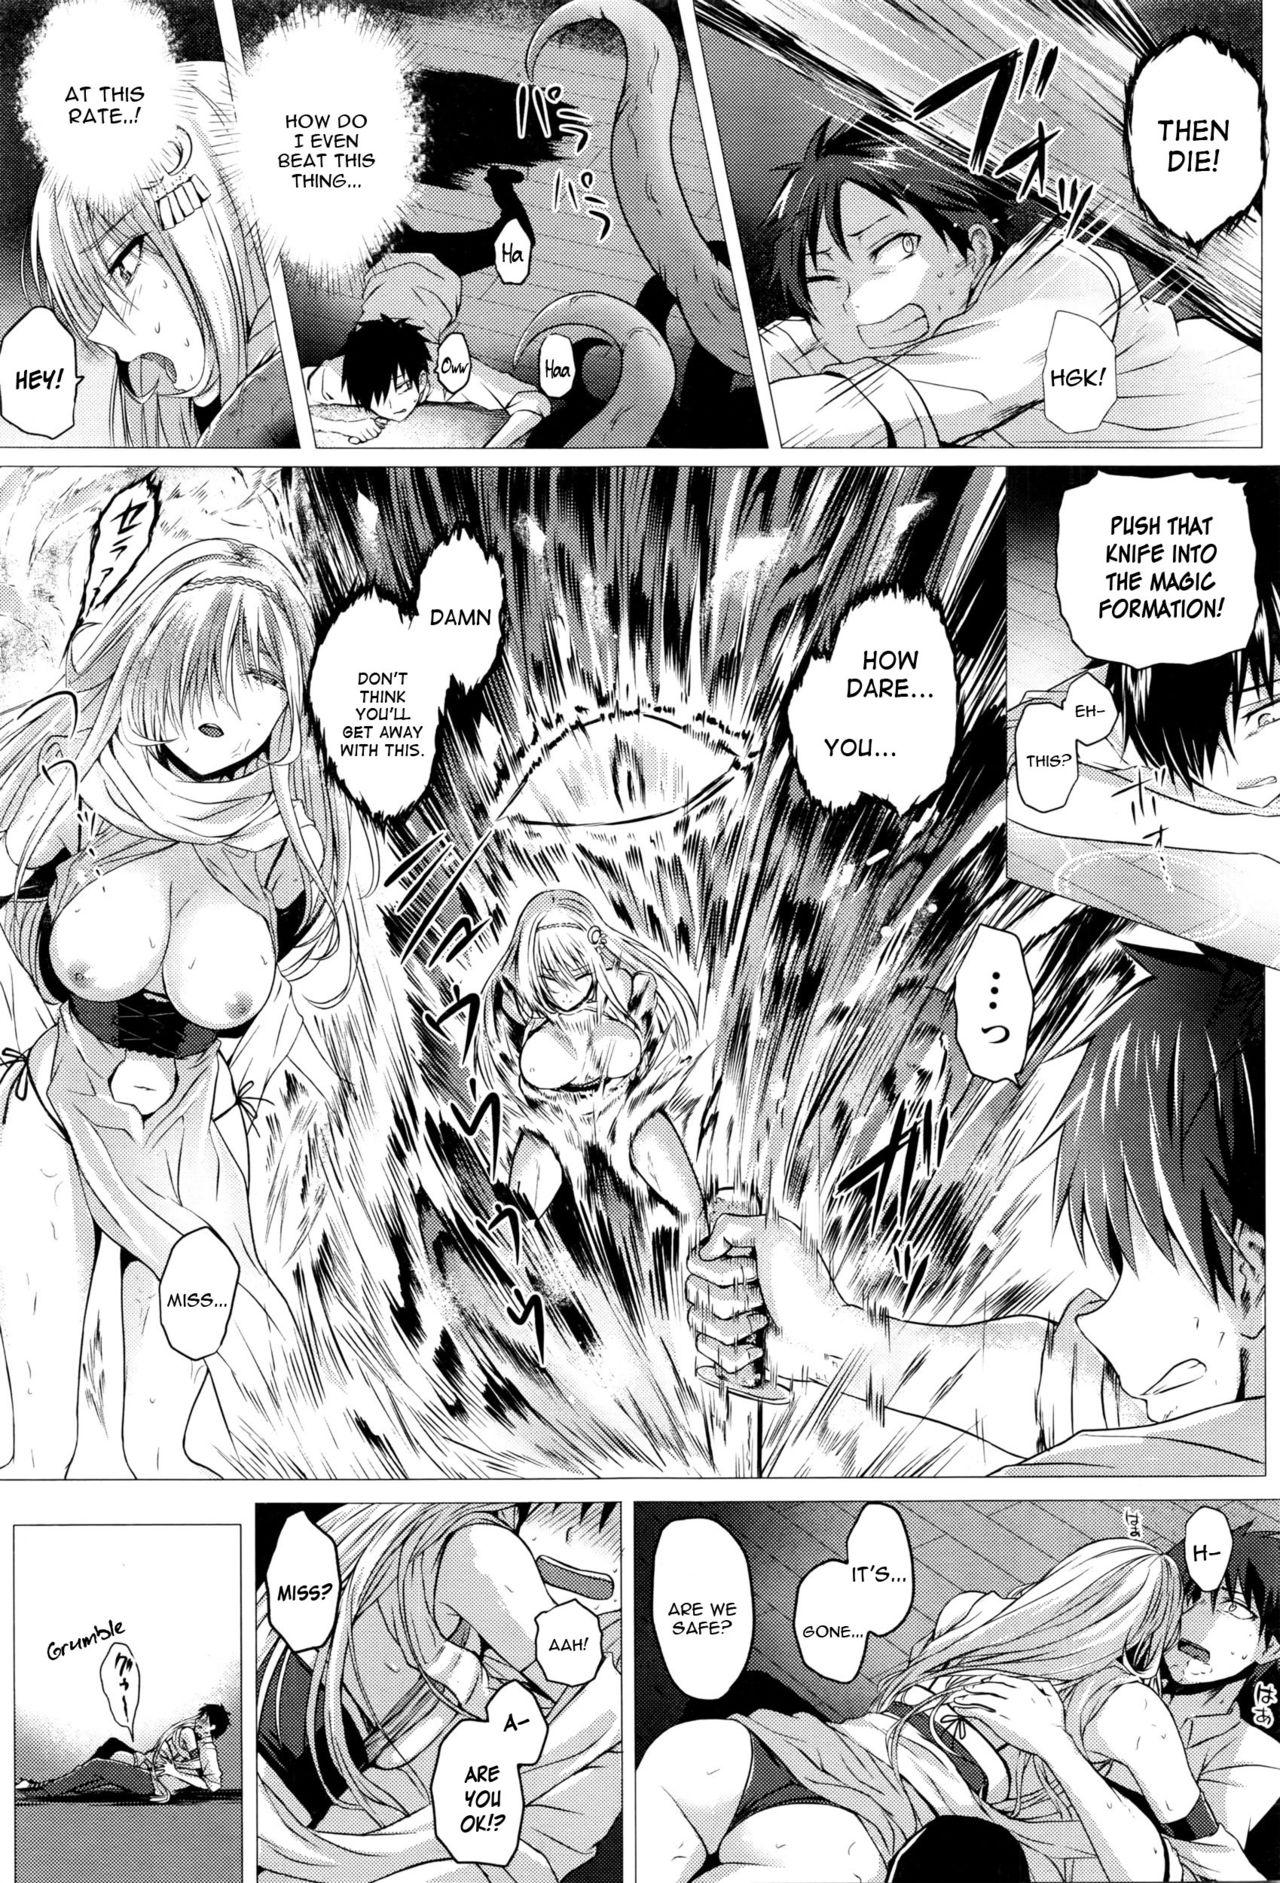 Dick Suckers [Simon] Isekai no Mahoutsukai Ch. 1-2 | Mage From Another World Ch. 1-2 [English] [constantly] Free Hardcore - Page 5